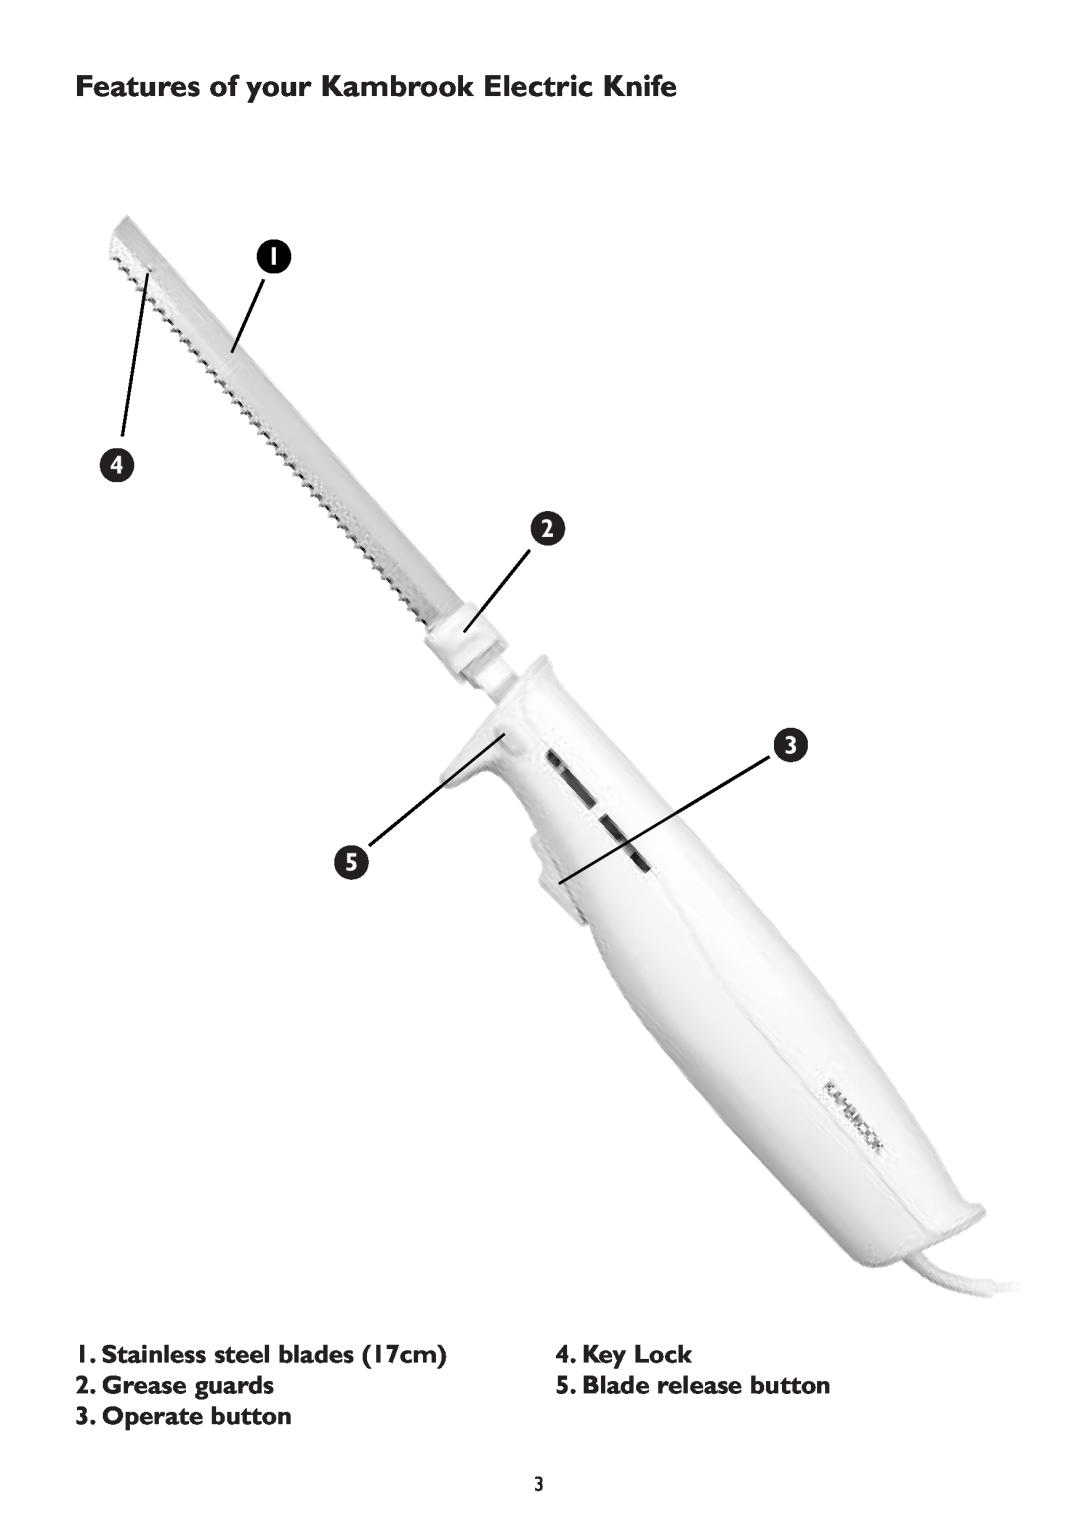 Kambrook EK9B manual Features of your Kambrook Electric Knife, Stainless steel blades 17cm, Key Lock, Grease guards 